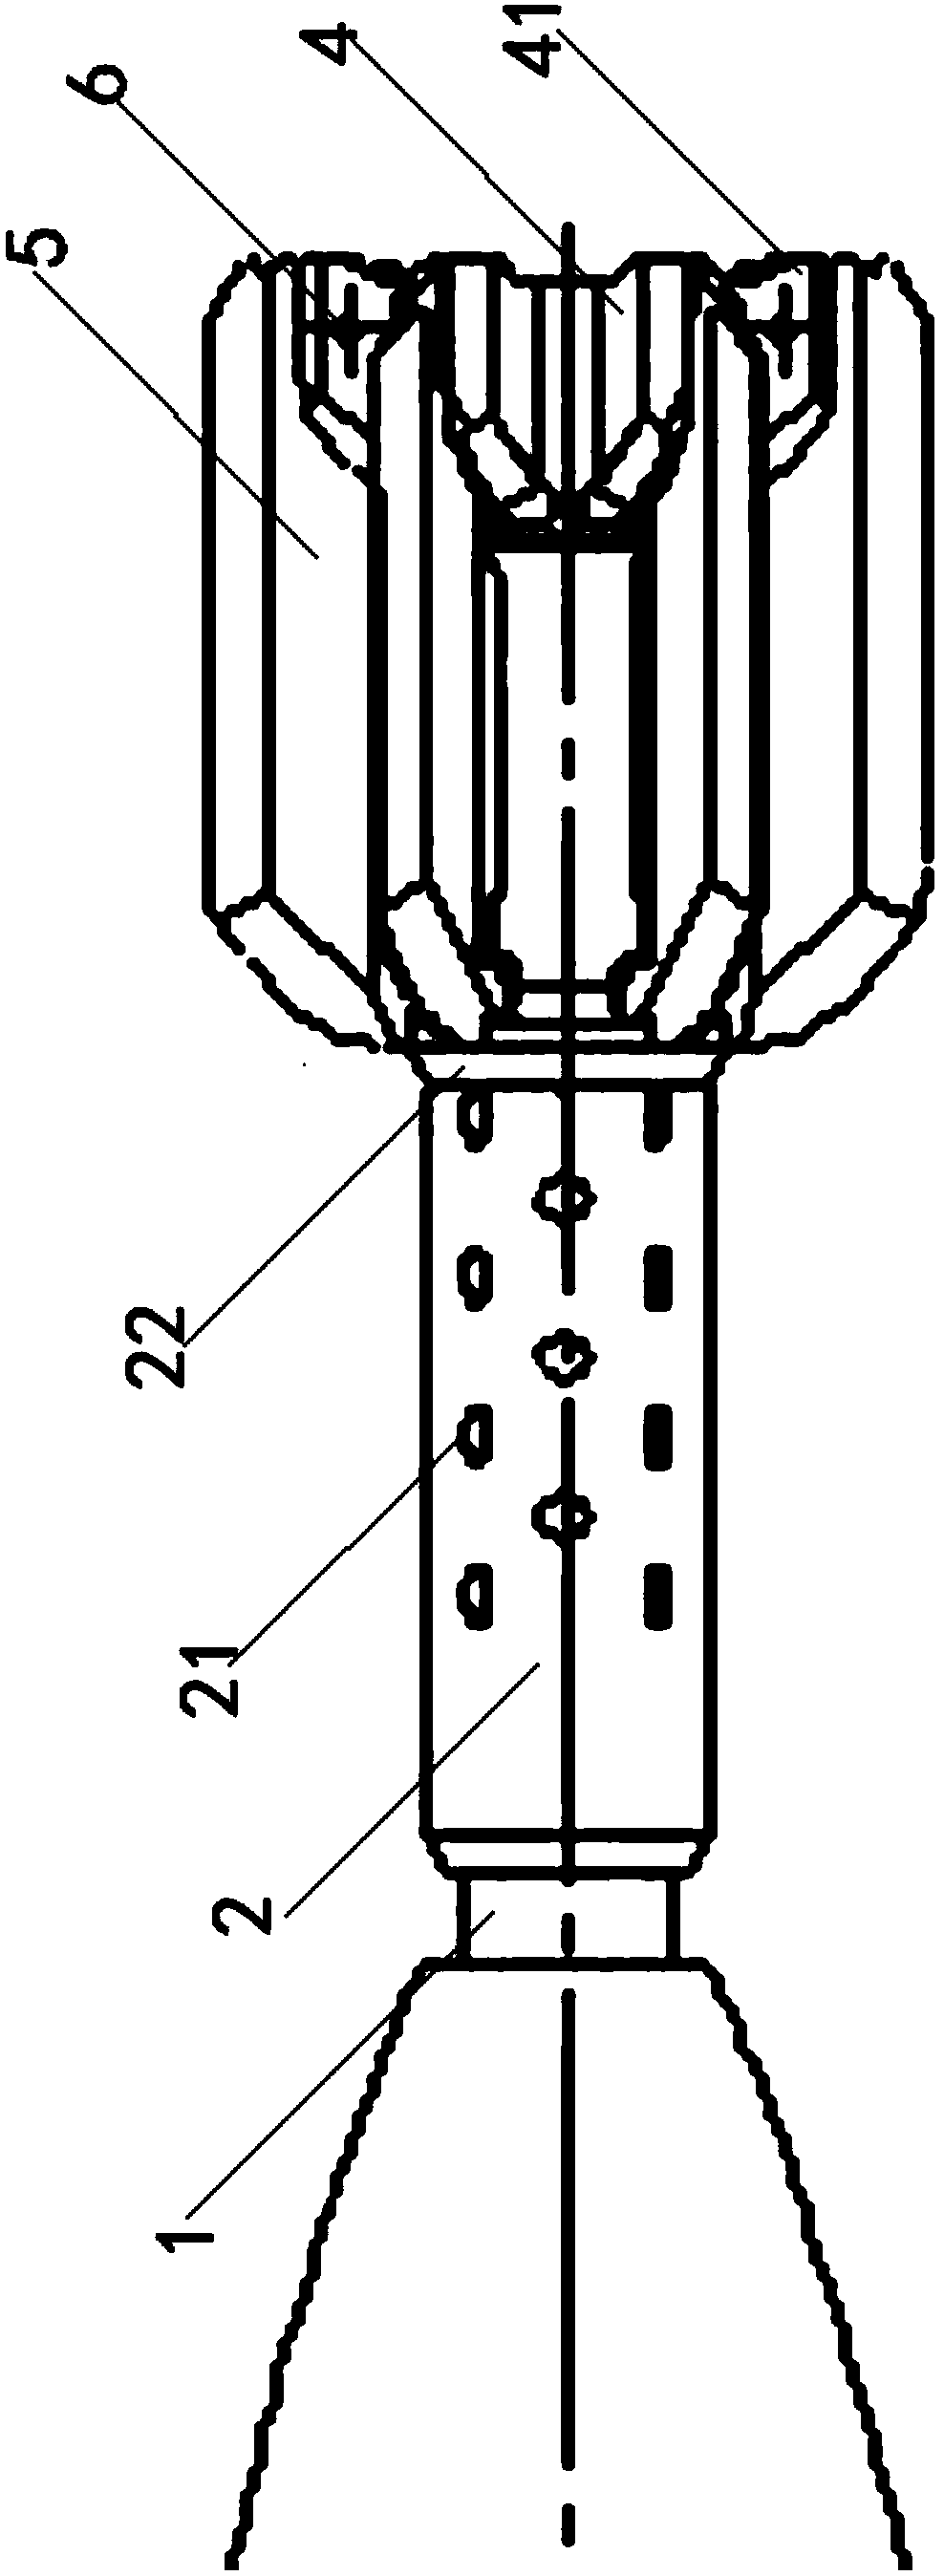 Variable pneumatic layout structure for projectile body